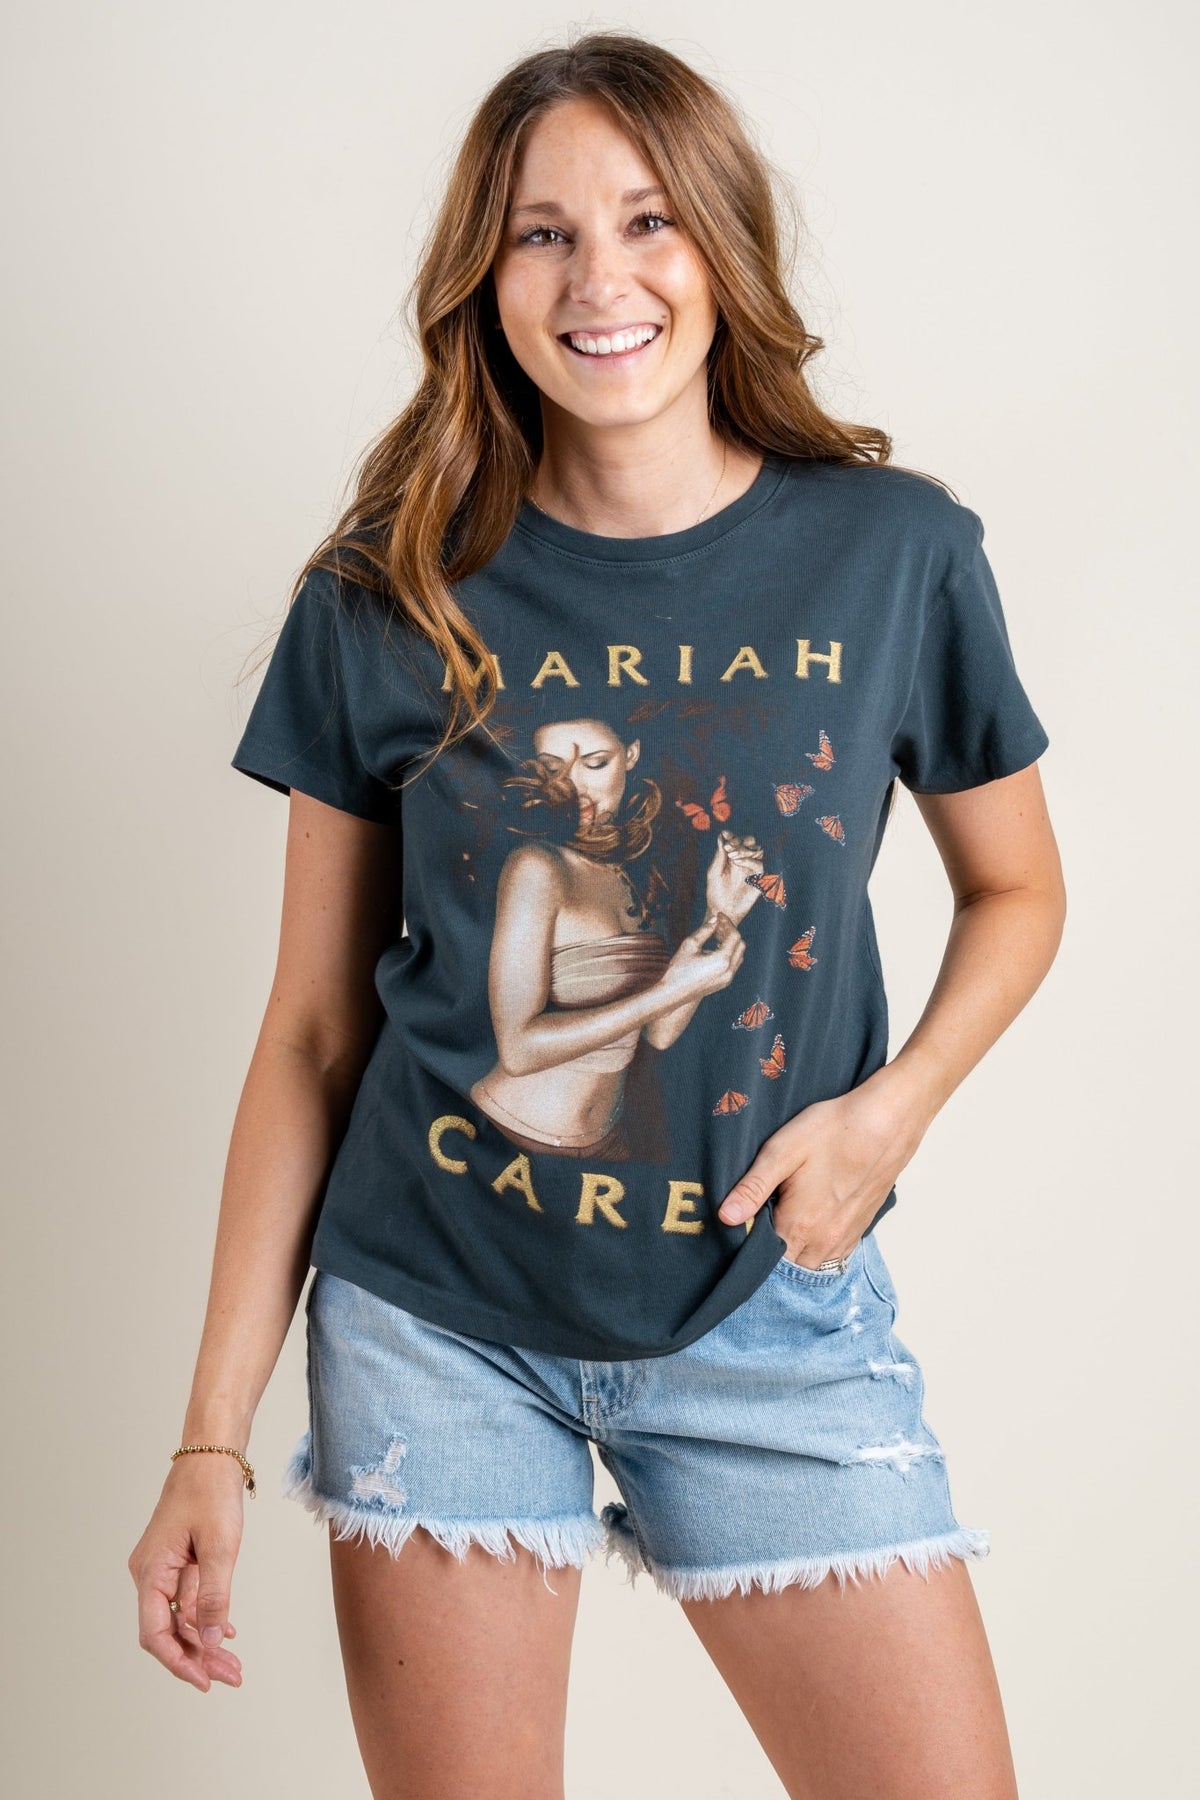 DayDreamer Mariah Carey butterfly t-shirt vintage black - DayDreamer Graphic Band Tees at Lush Fashion Lounge Trendy Boutique in Oklahoma City